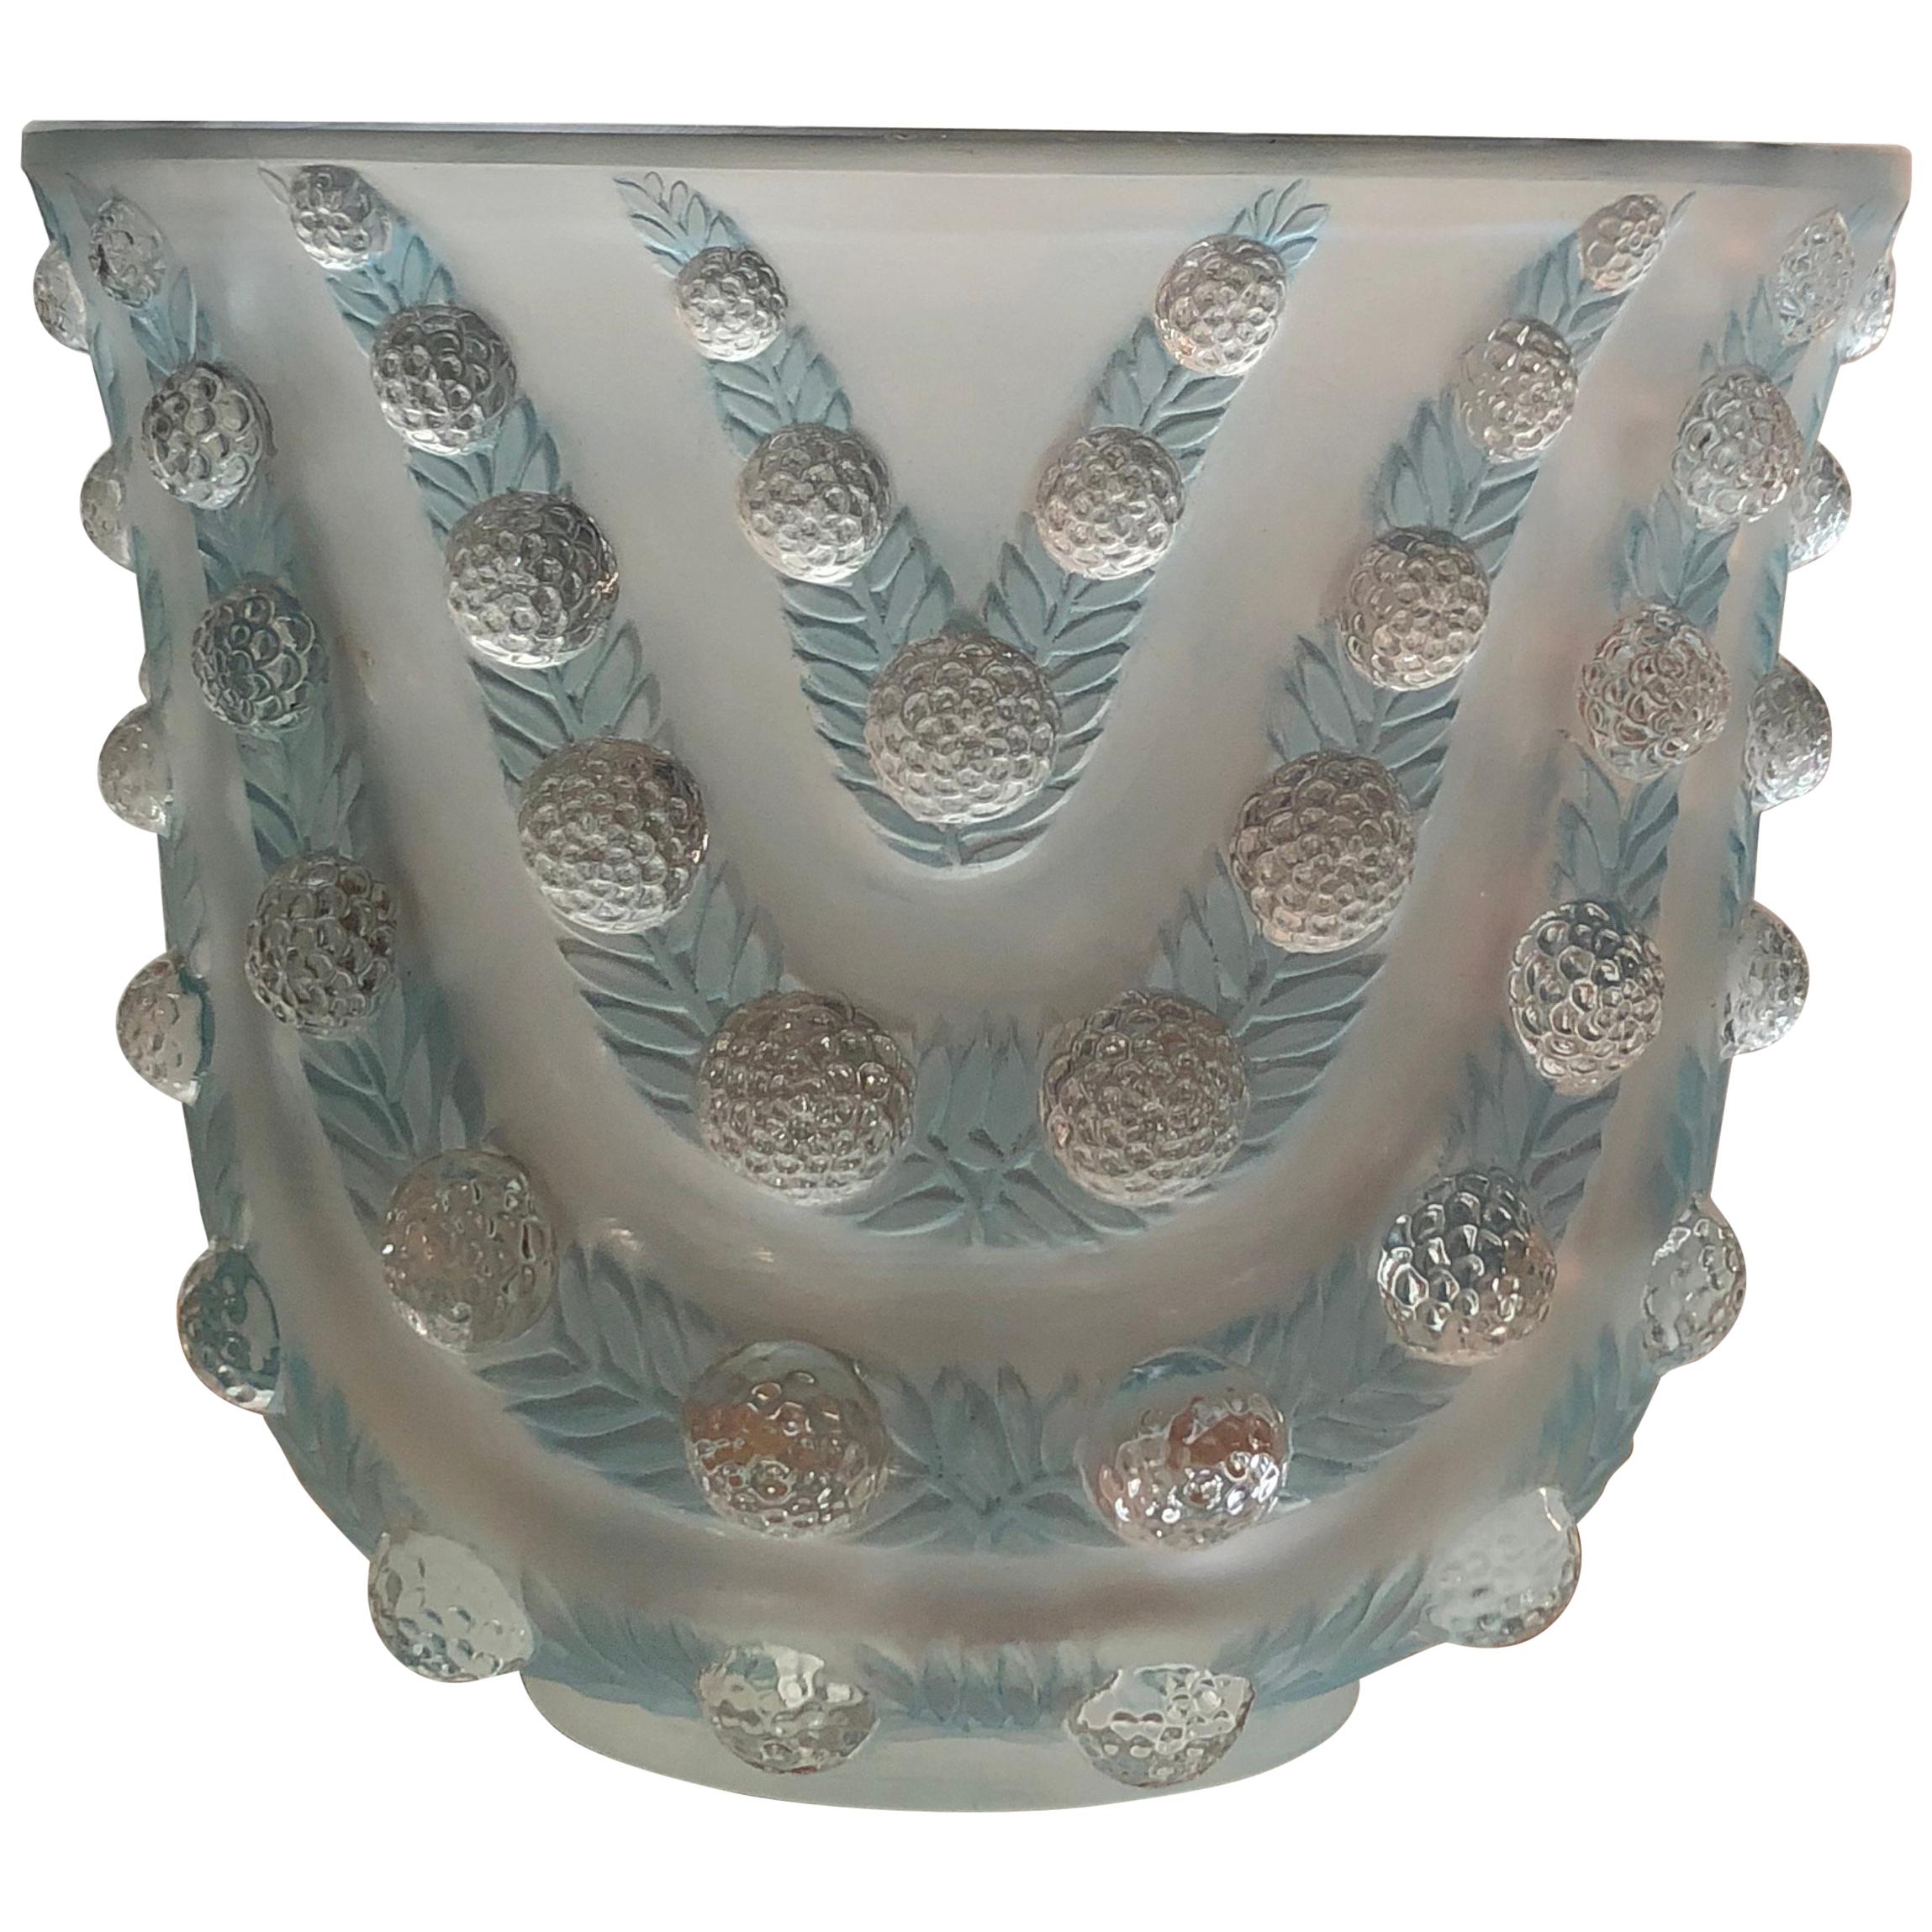 1937 René Lalique Vichy Vase in Frosted and Blue Stained Glass, Flowers